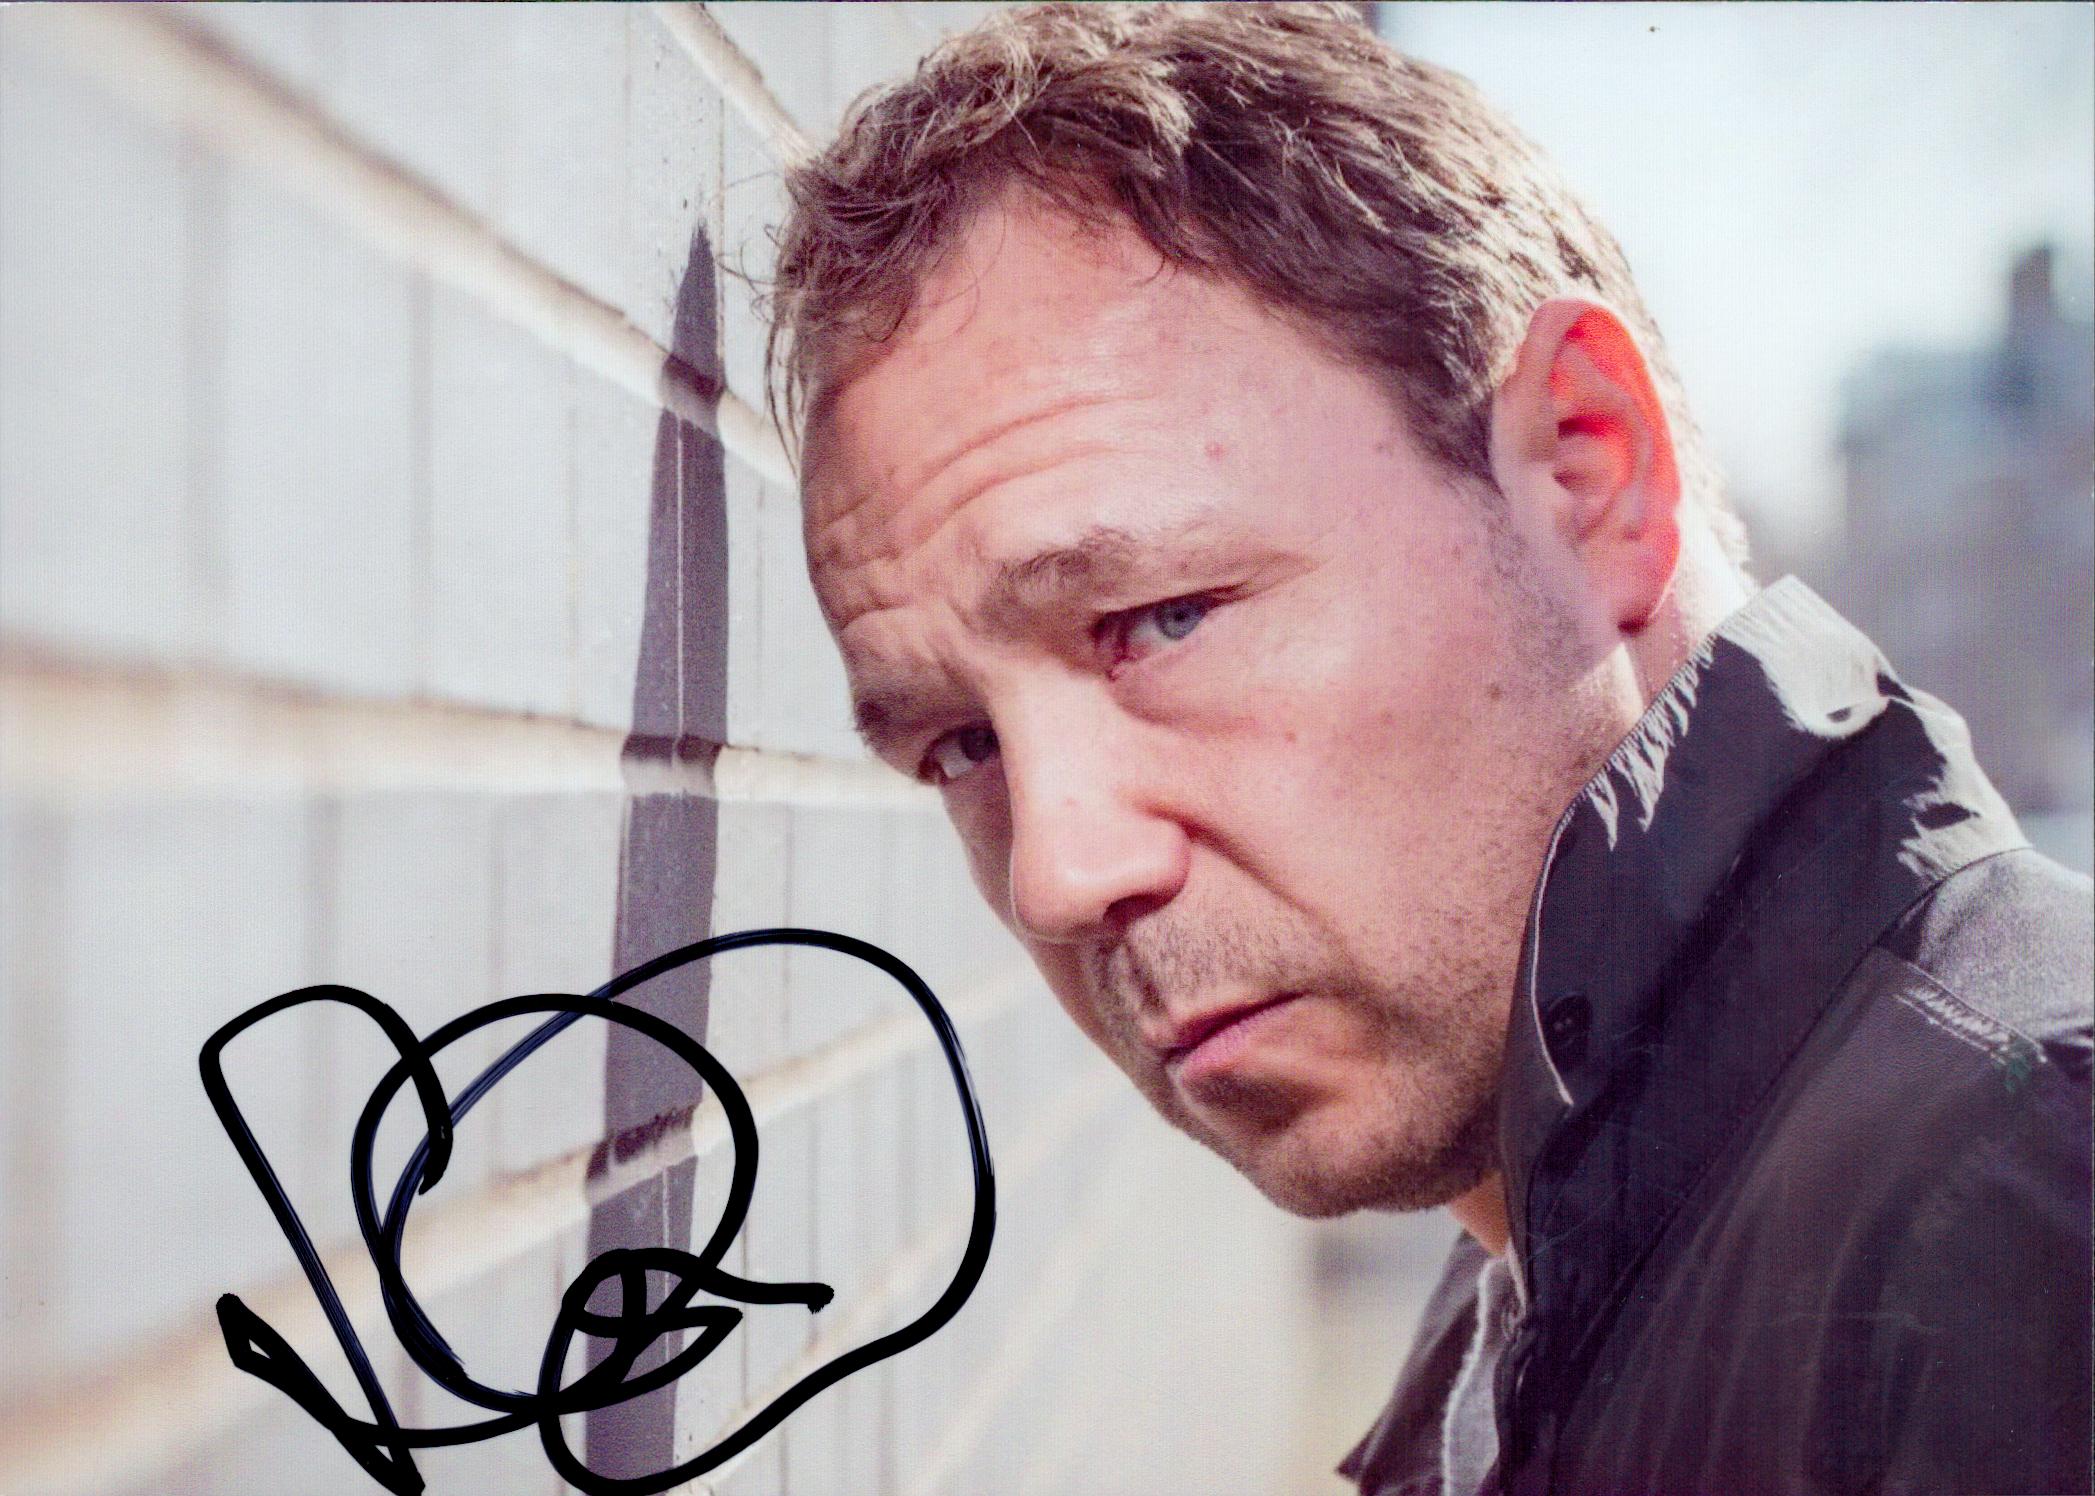 Stephen Graham signed colour photo Measures 7"x5"appx. Good condition. All autographs come with a